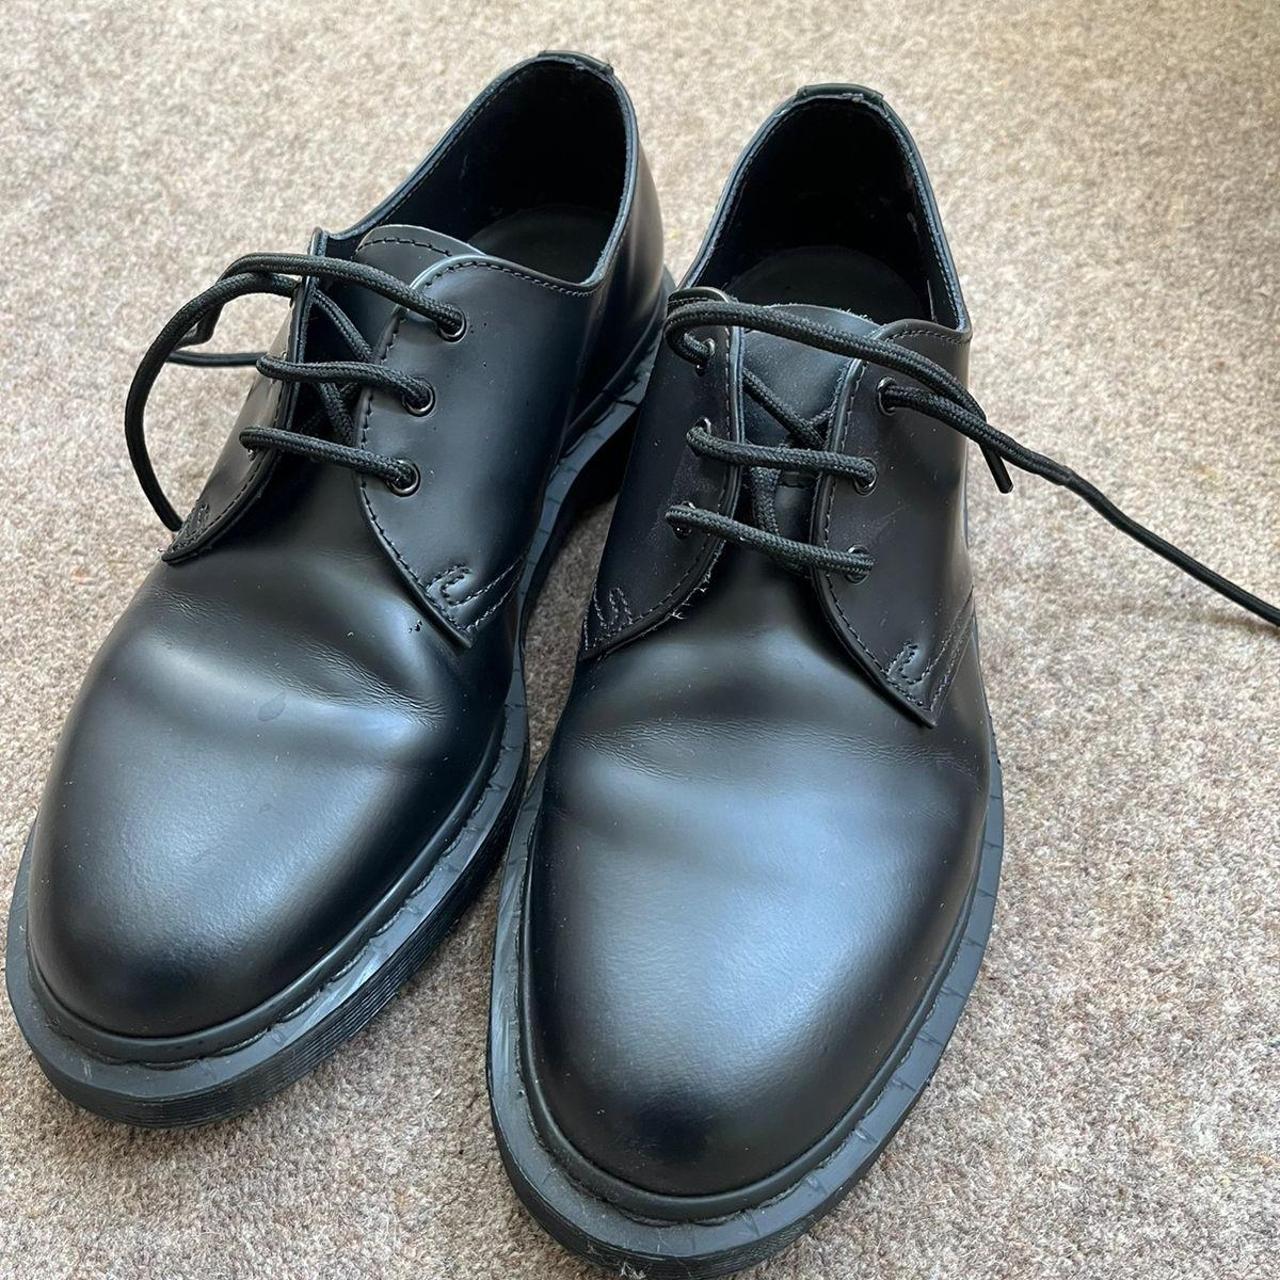 Dr Martens 1461 Mono Smooth Leather Oxford... - Depop